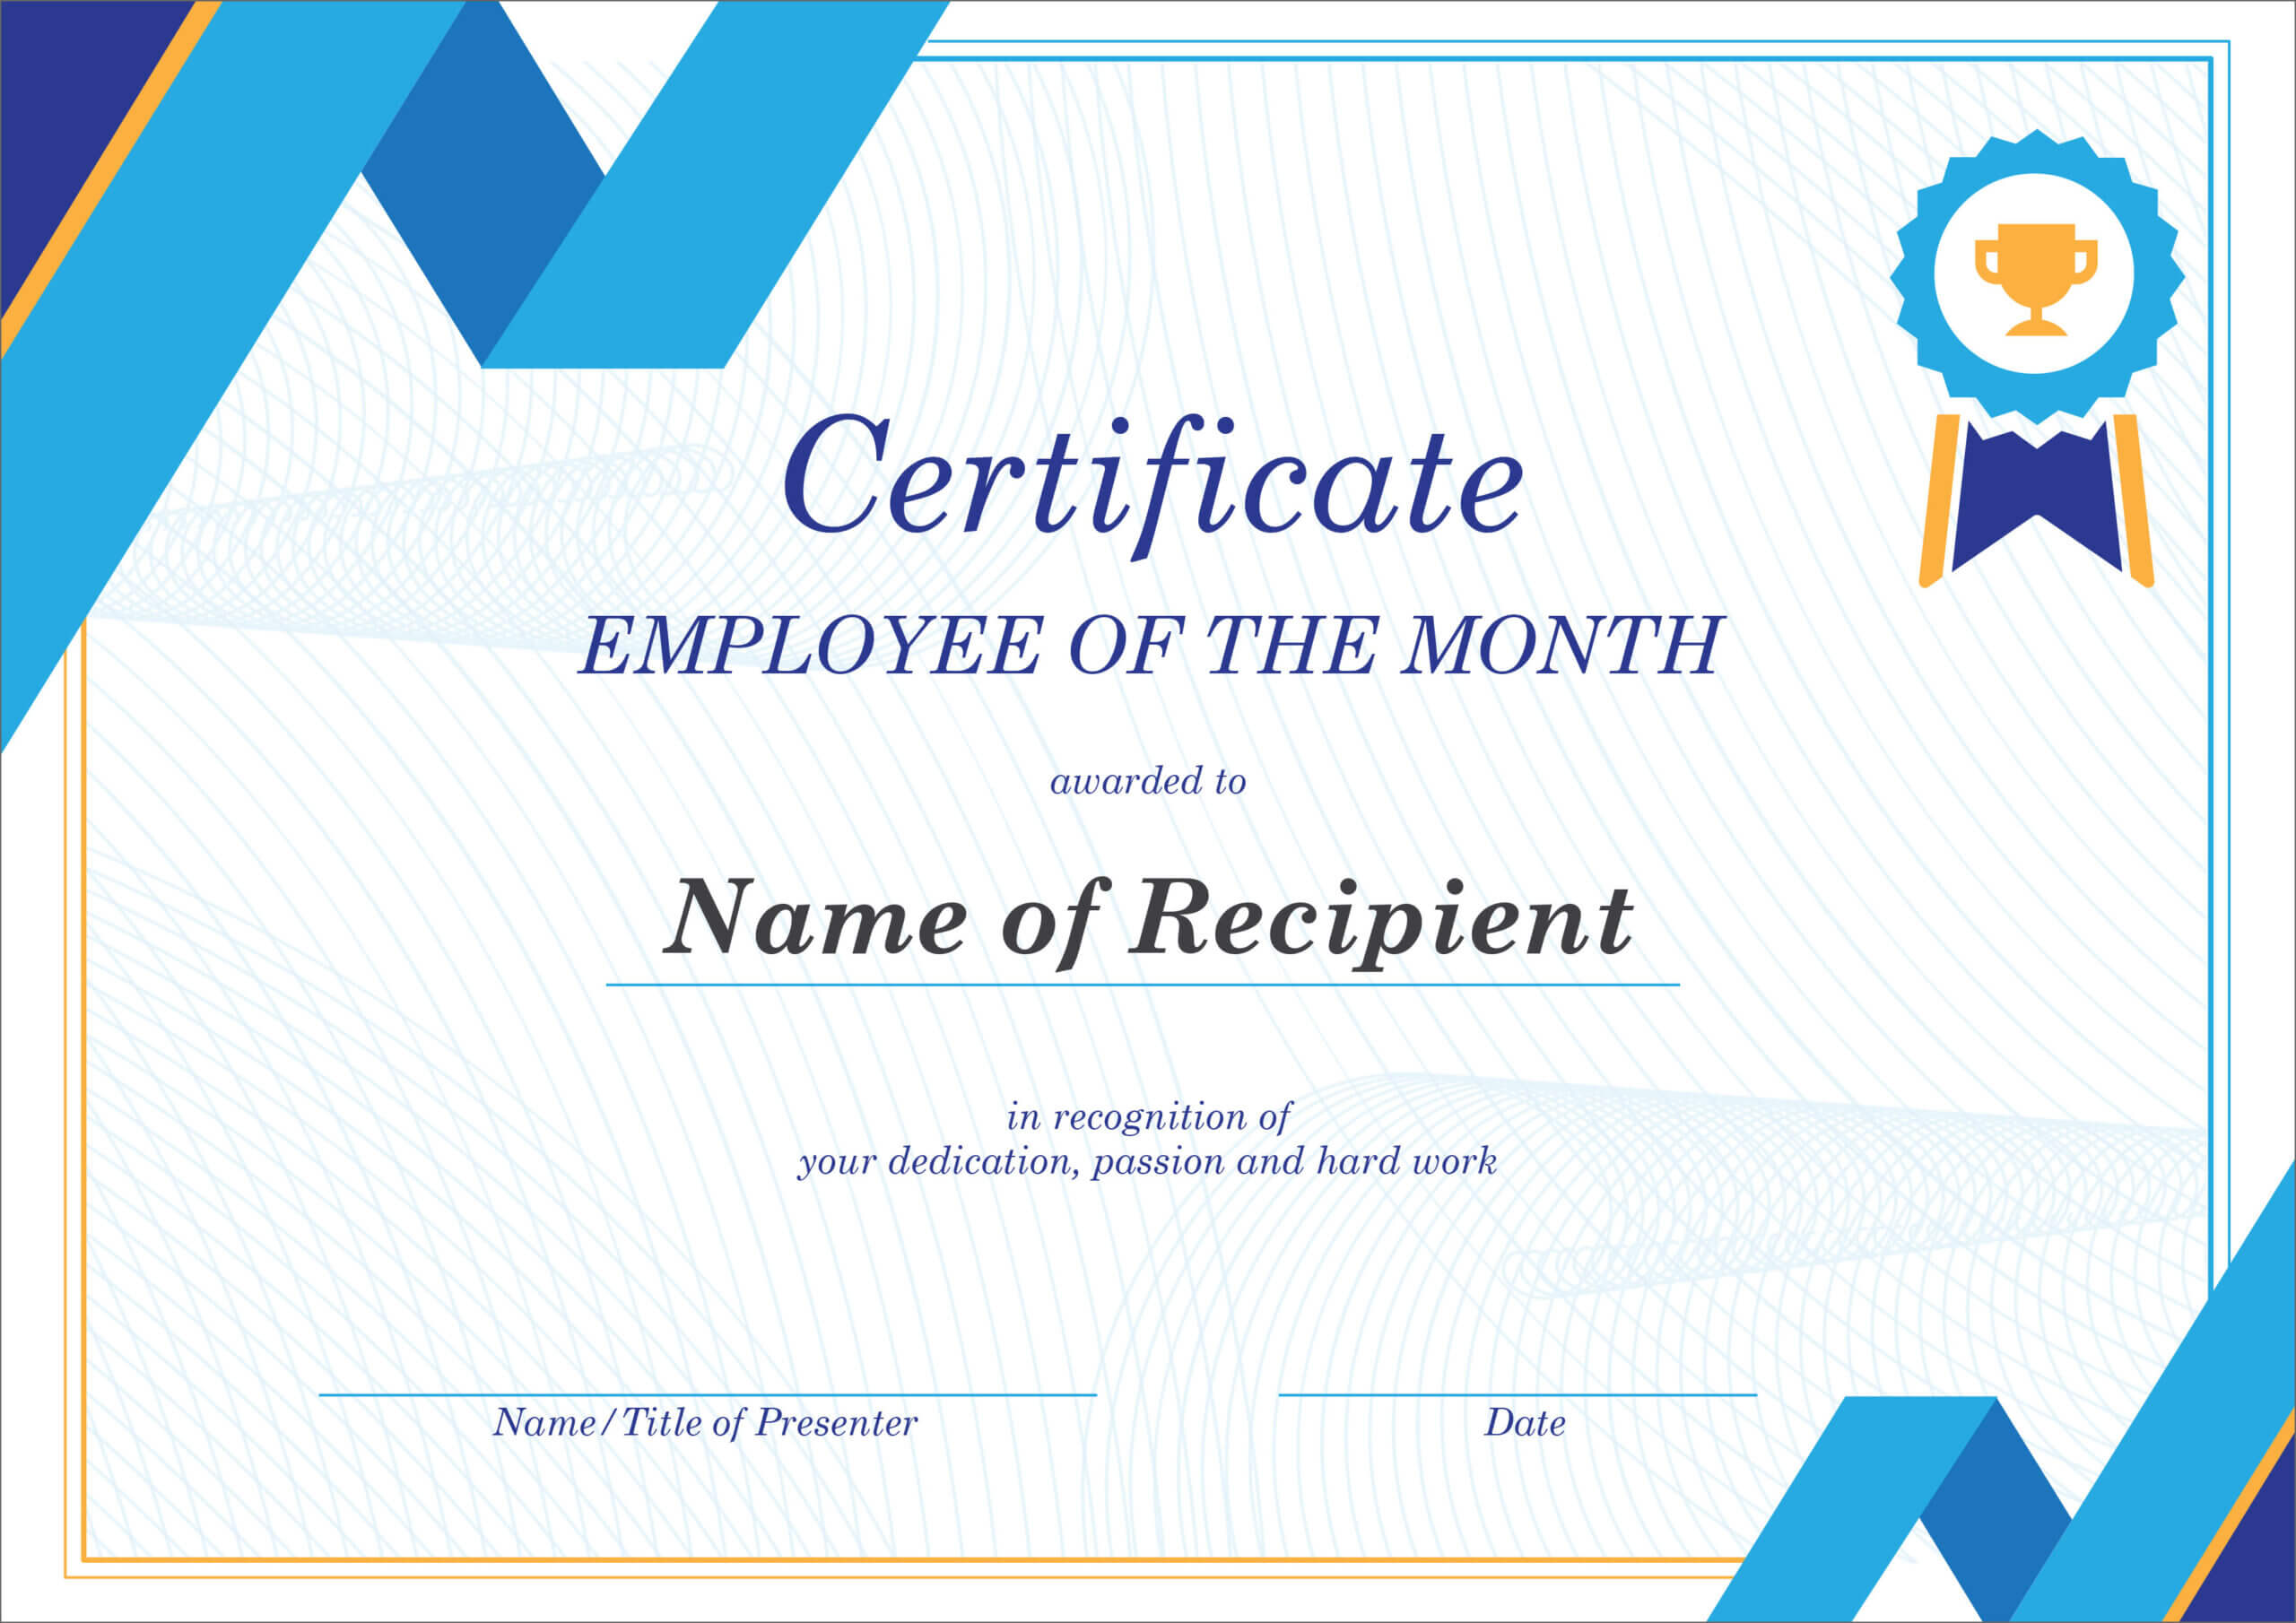 50 Free Creative Blank Certificate Templates In Psd Pertaining To Employee Of The Month Certificate Templates